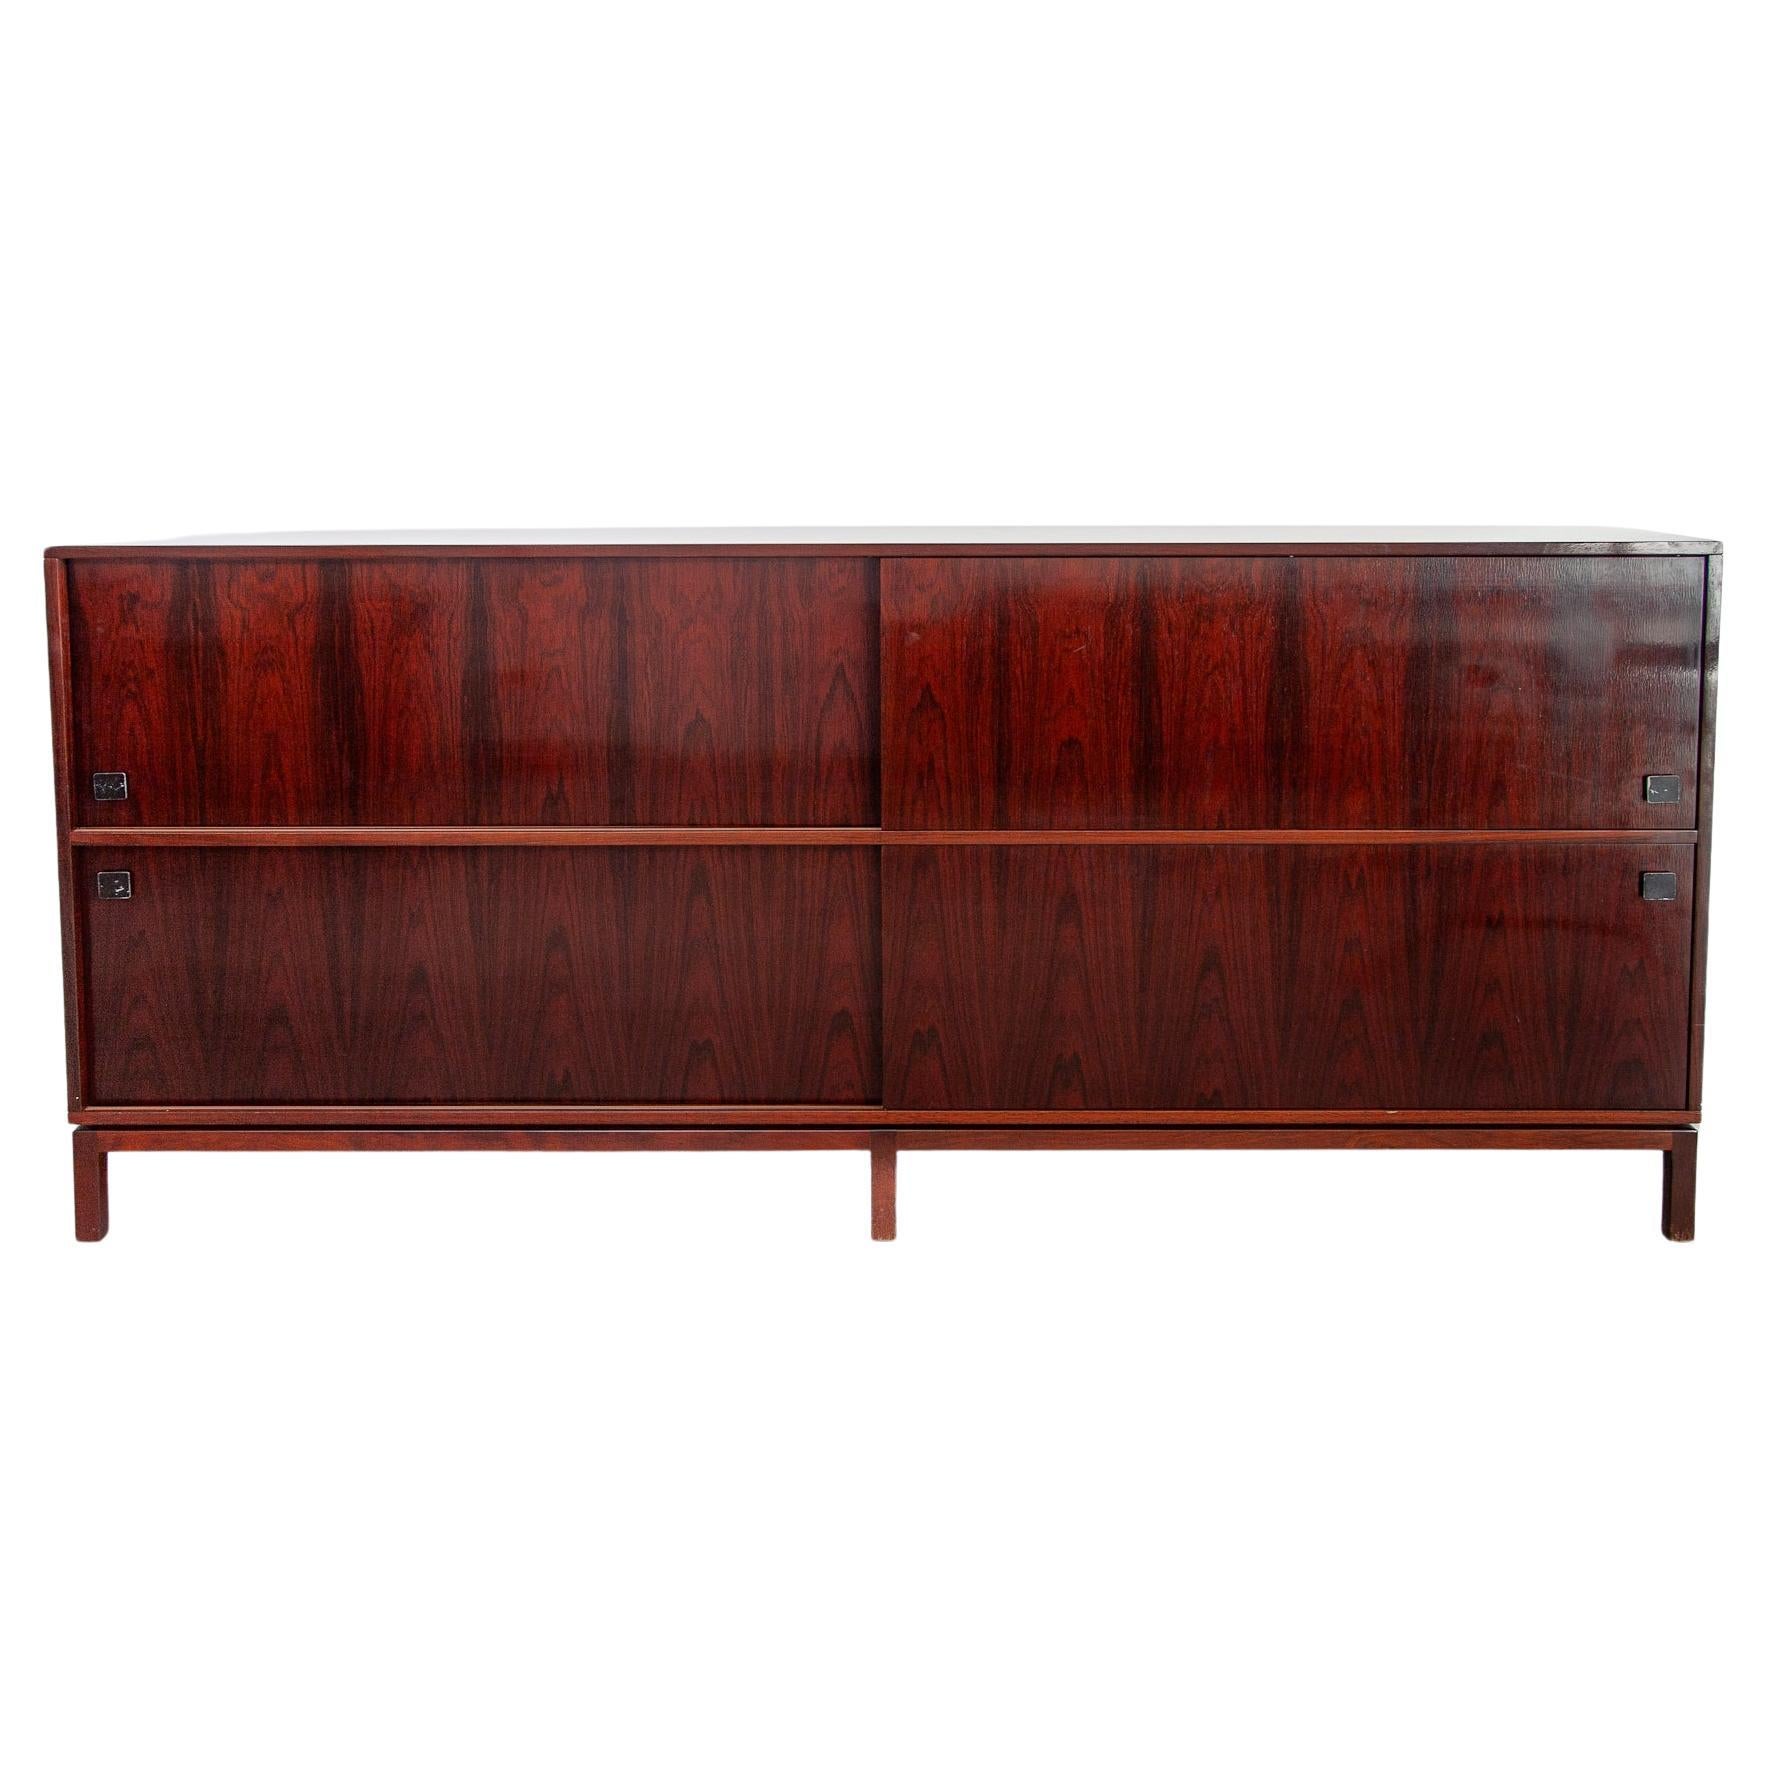 Rare and beautiful high double sideboard, designed by the Belgian Architect Modernist Alfred Hendrickx for Belform, 1960. Beautiful decorative furniture because of the reflection of the walnut veneer. A very practical piece of furniture, sideboard